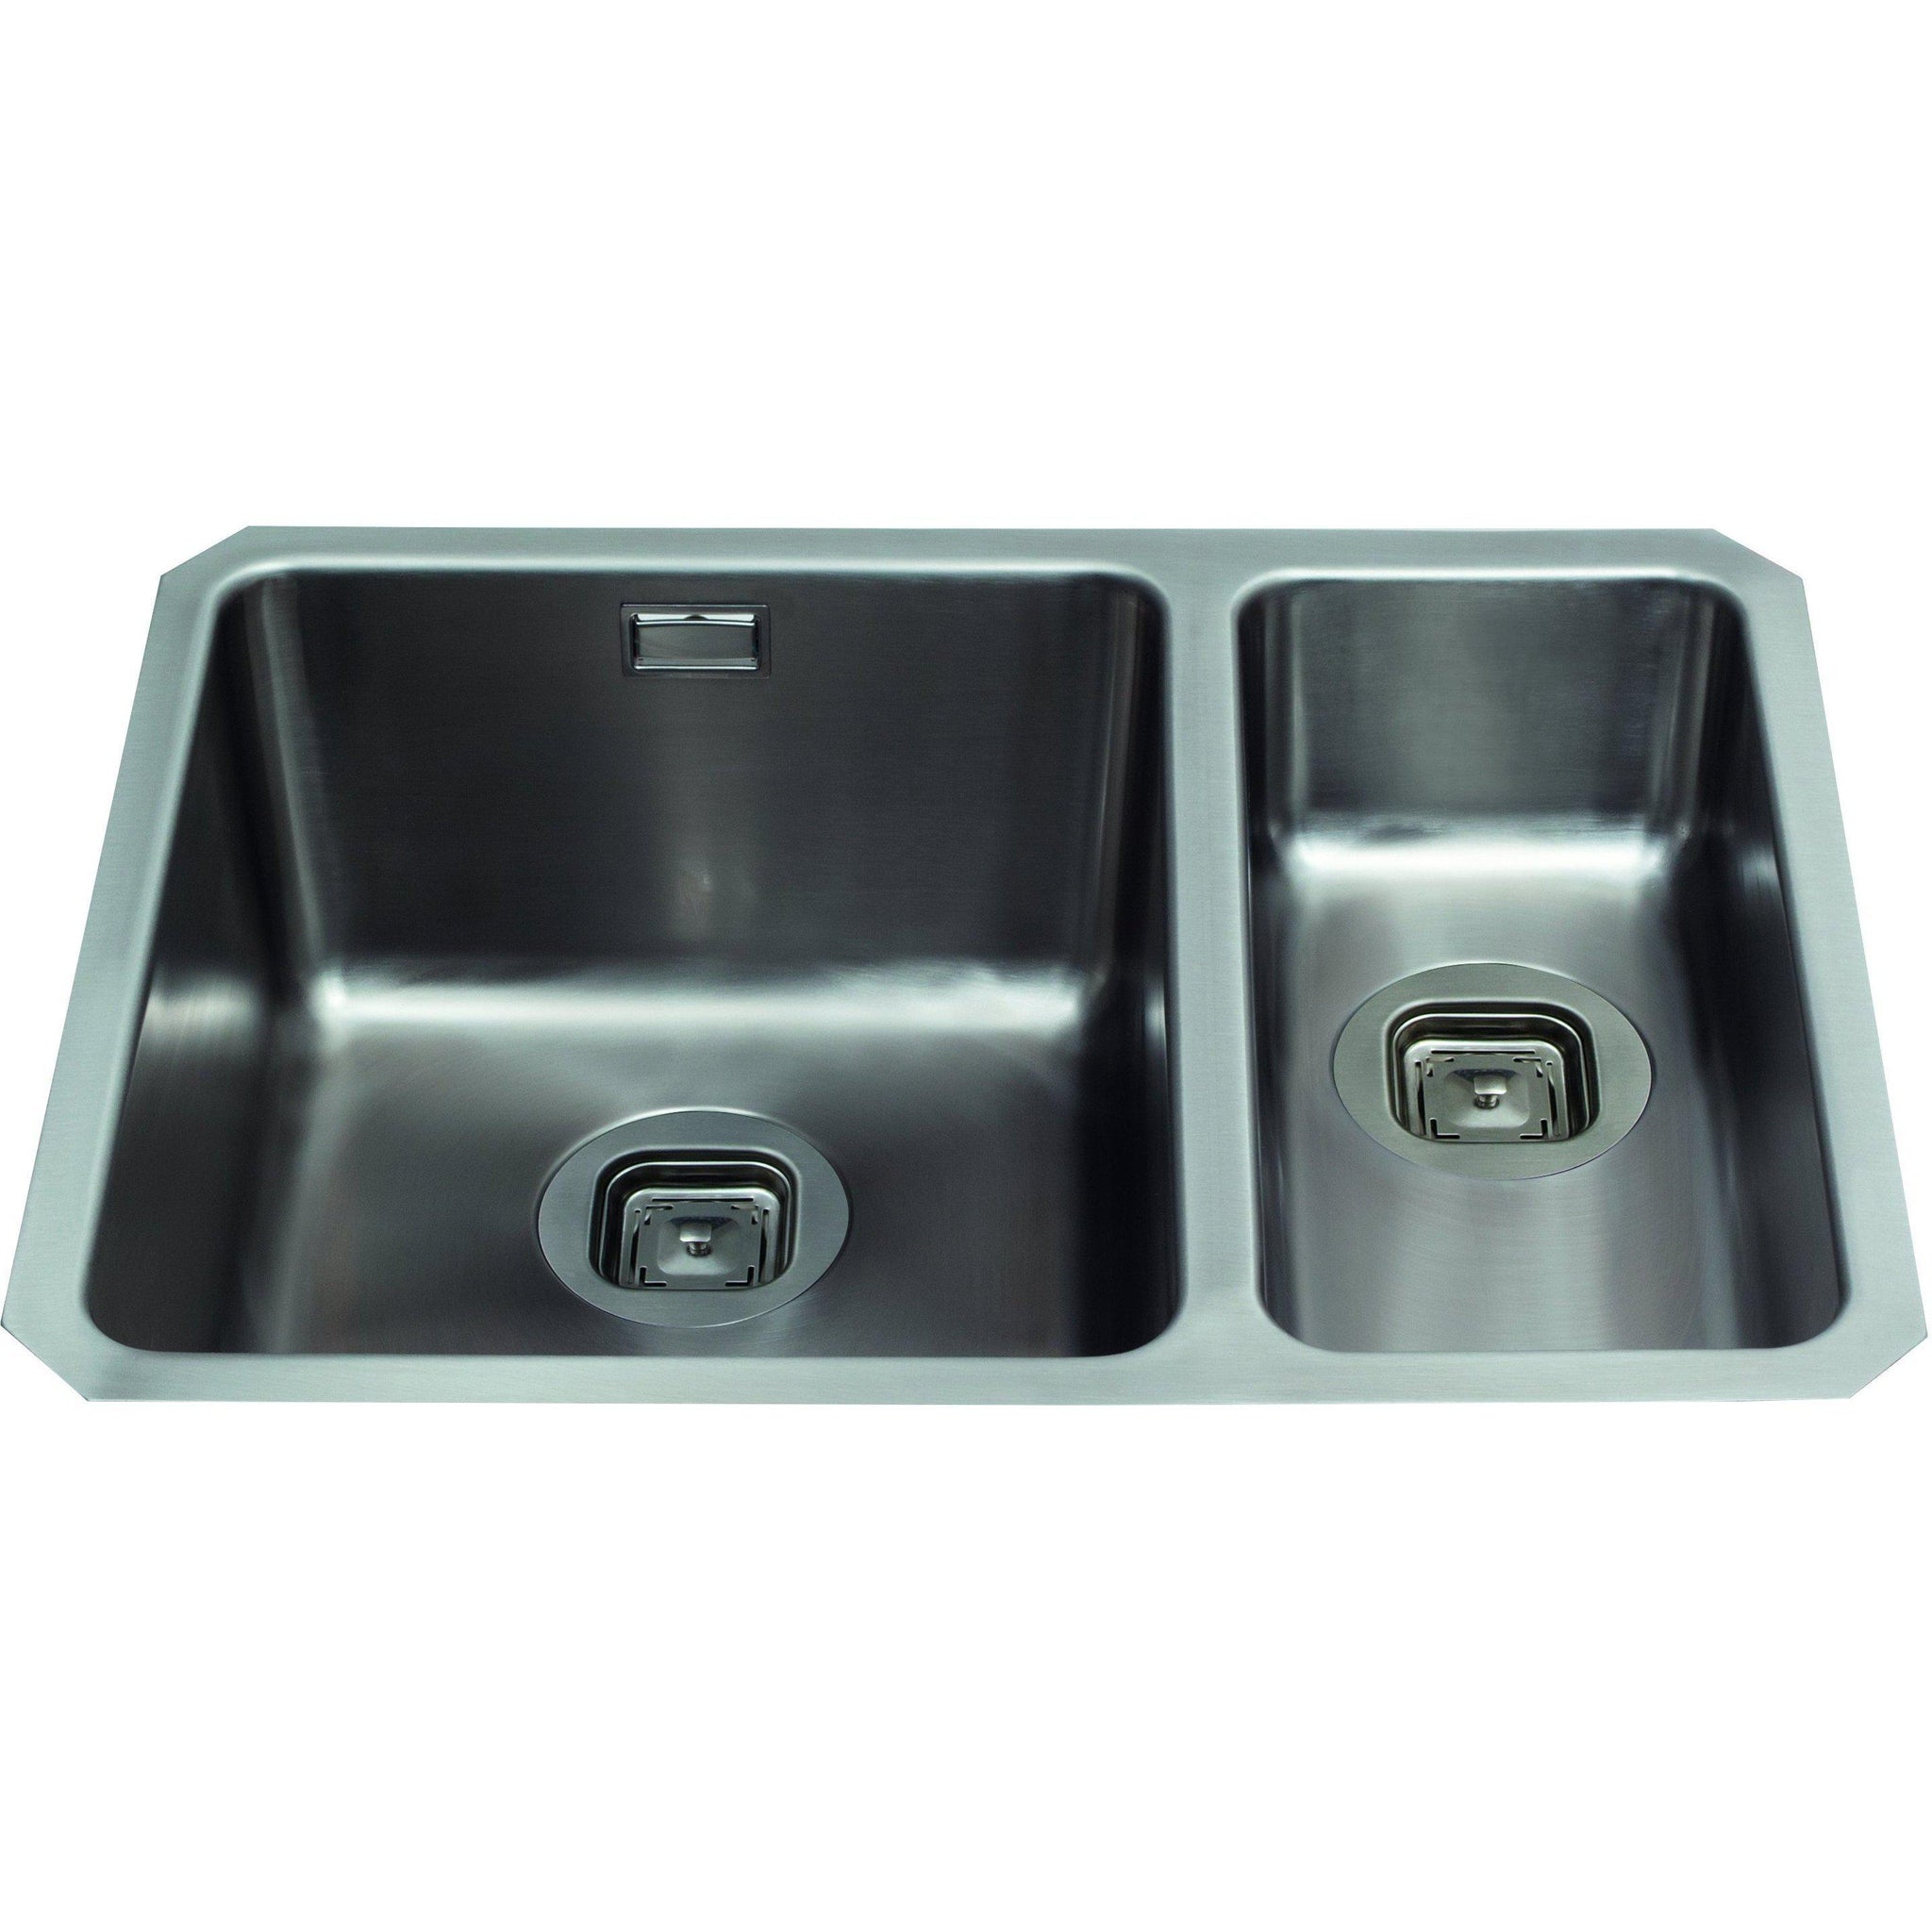 Cda Kvc35rss 15 Bowl Stainless Steel Undermount Small Bowl On Right Stainless Steel